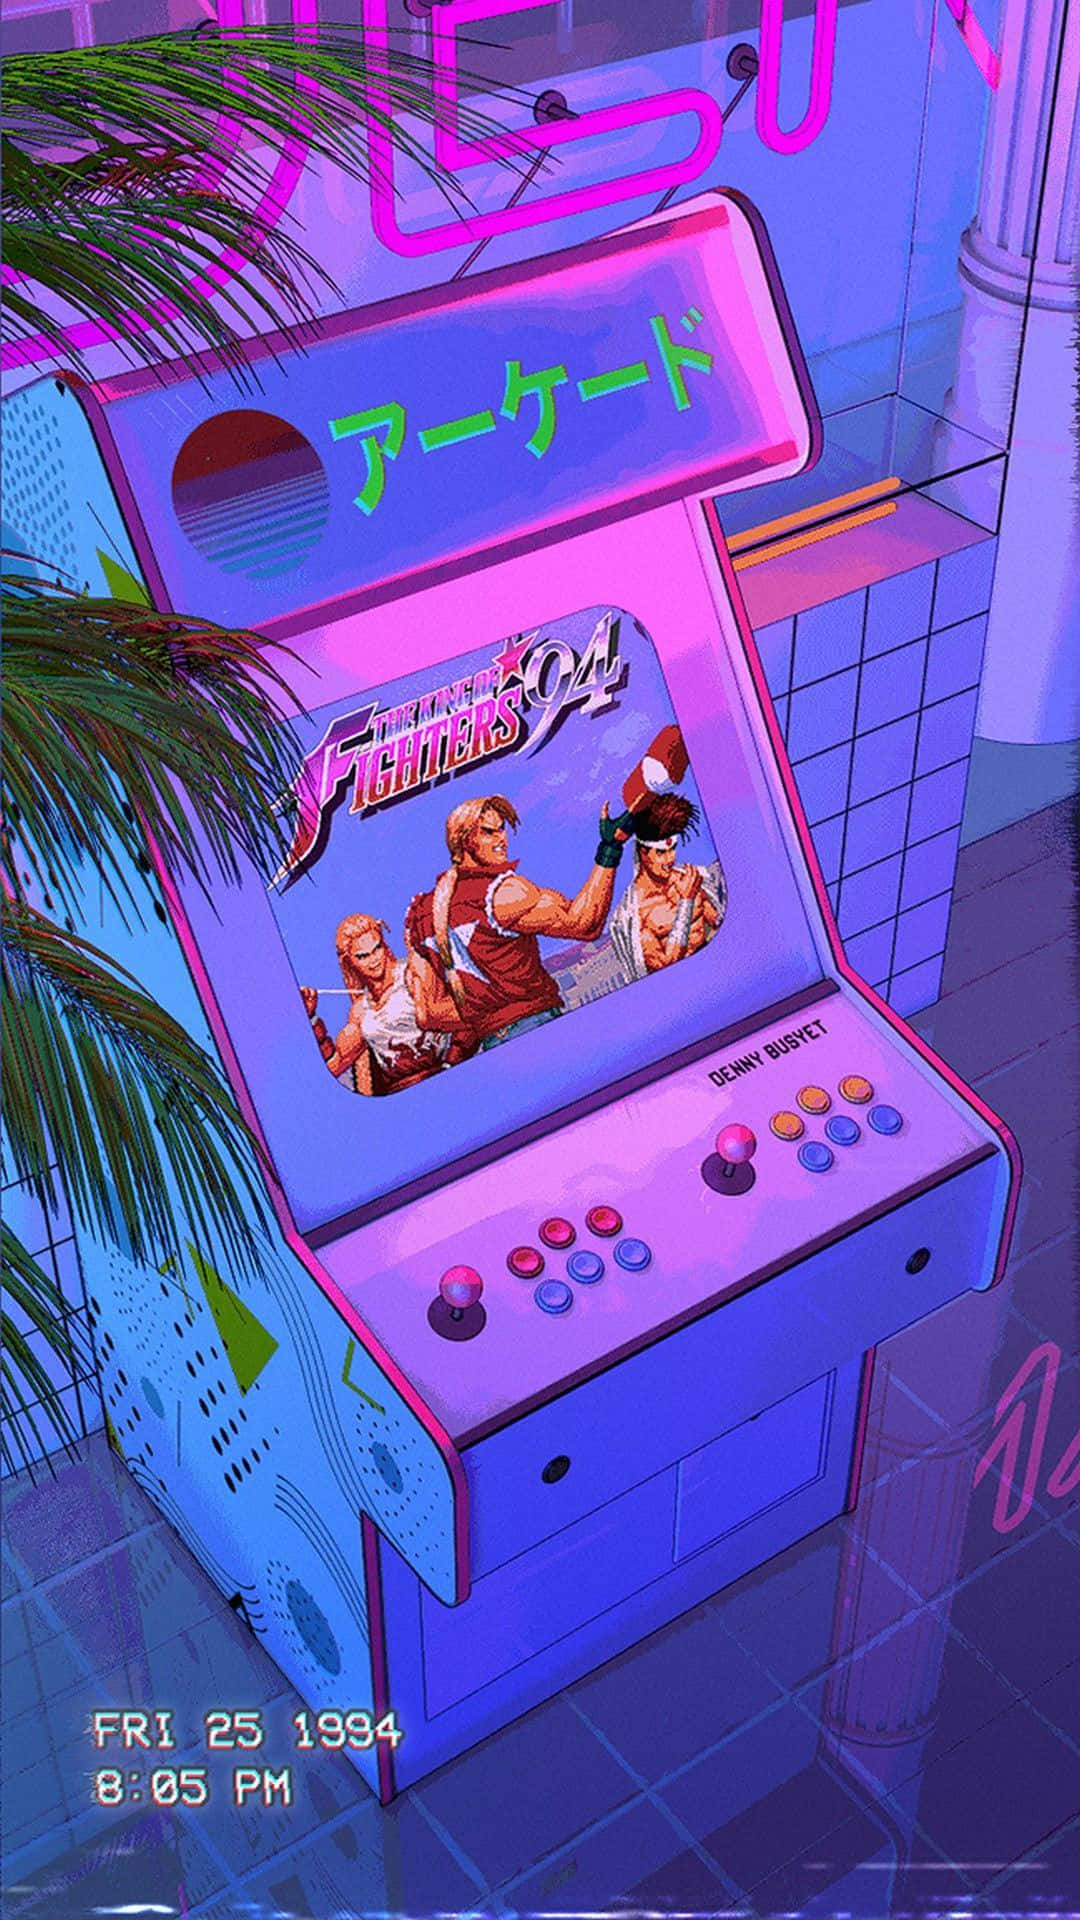 "Welcome to the neon-lit world of Arcade Aesthetic!" Wallpaper